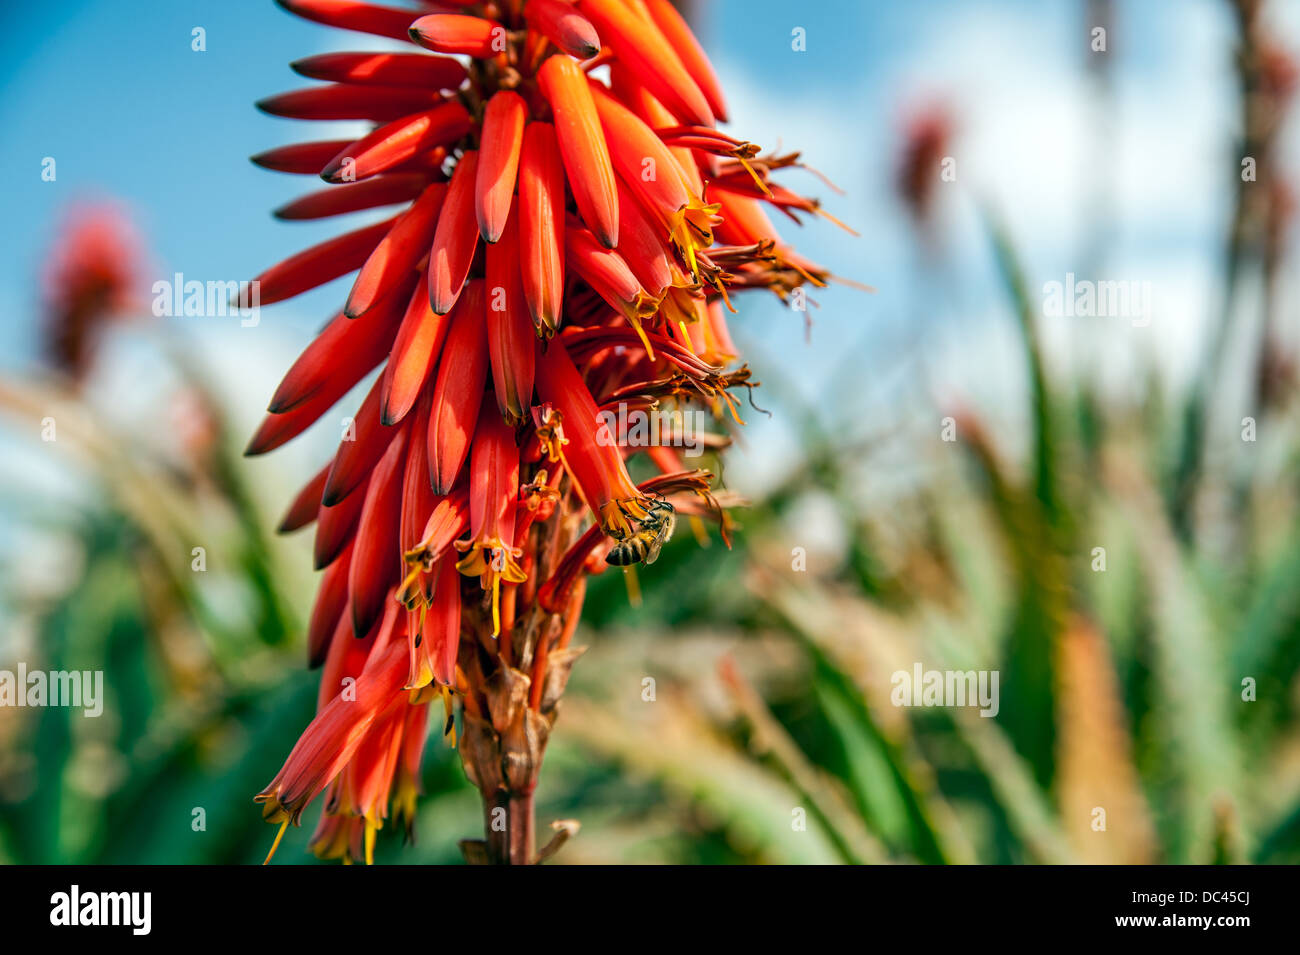 The bee is pollinating the aloe vera red flower Stock Photo